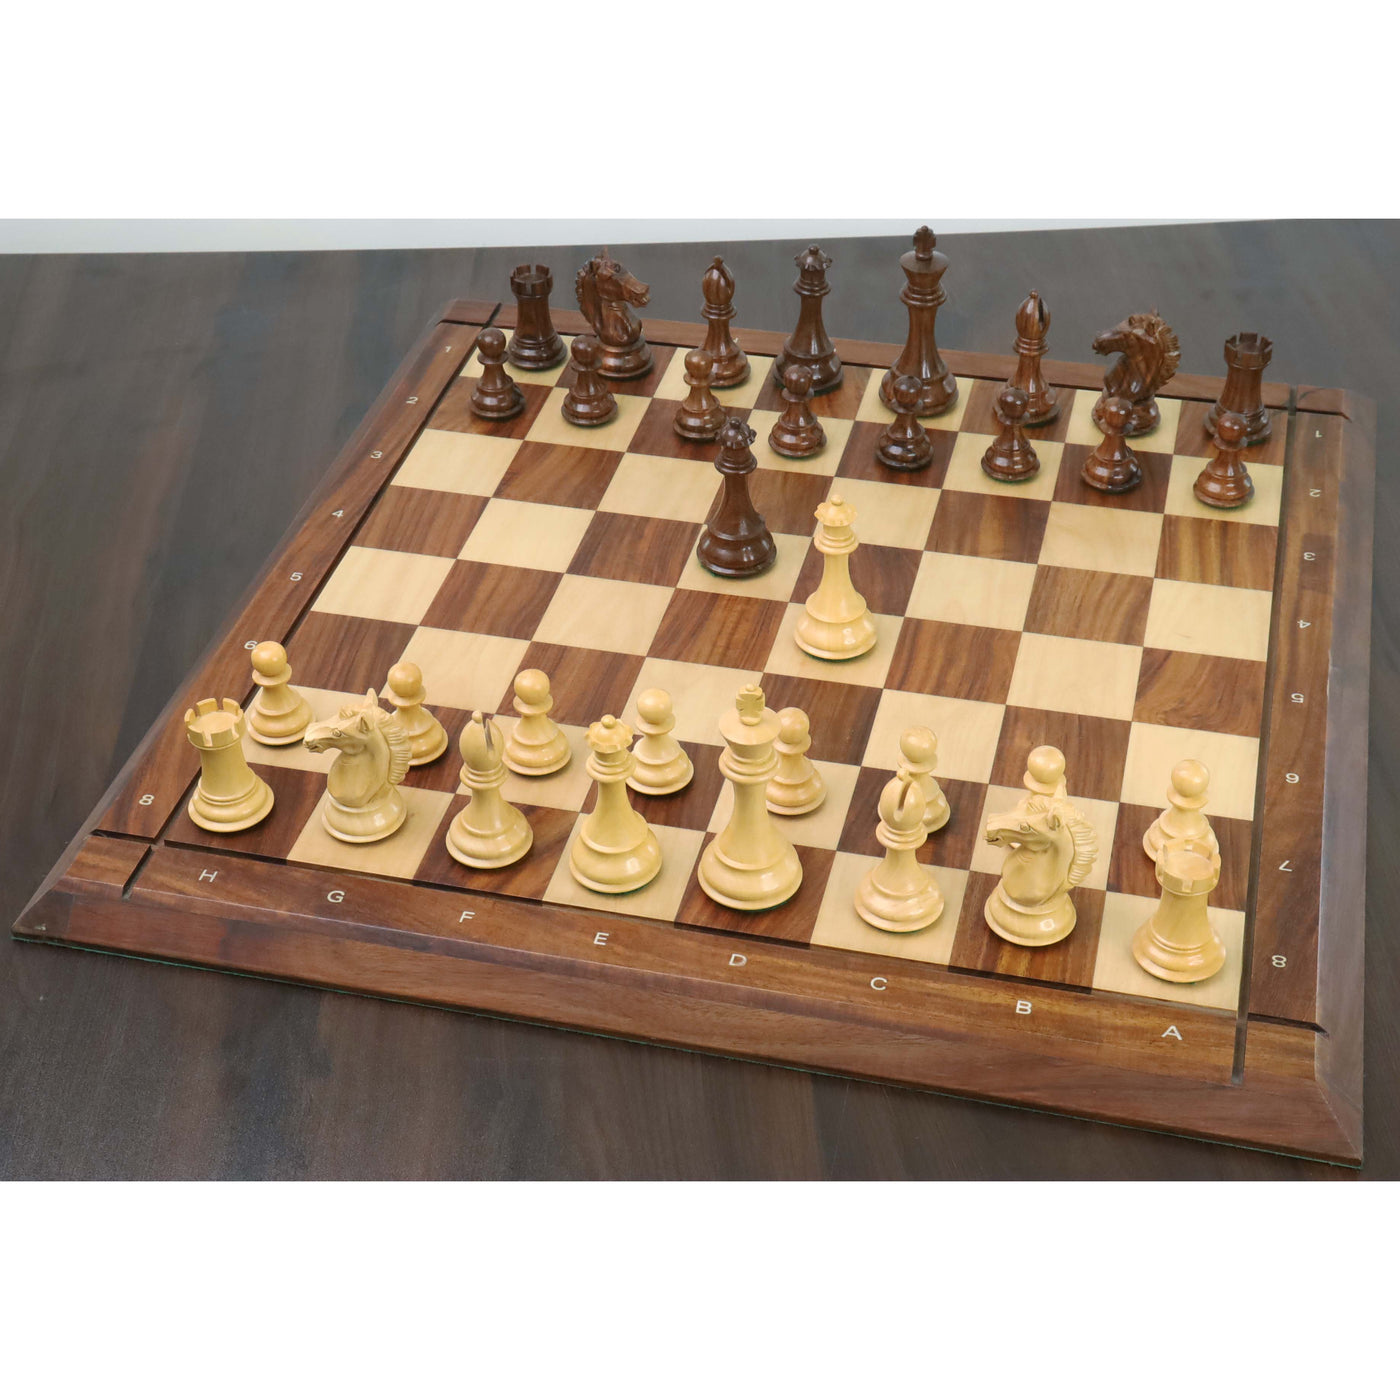 4" Alban Knight Staunton Chess Pieces Only set - Weighted Golden Rosewood